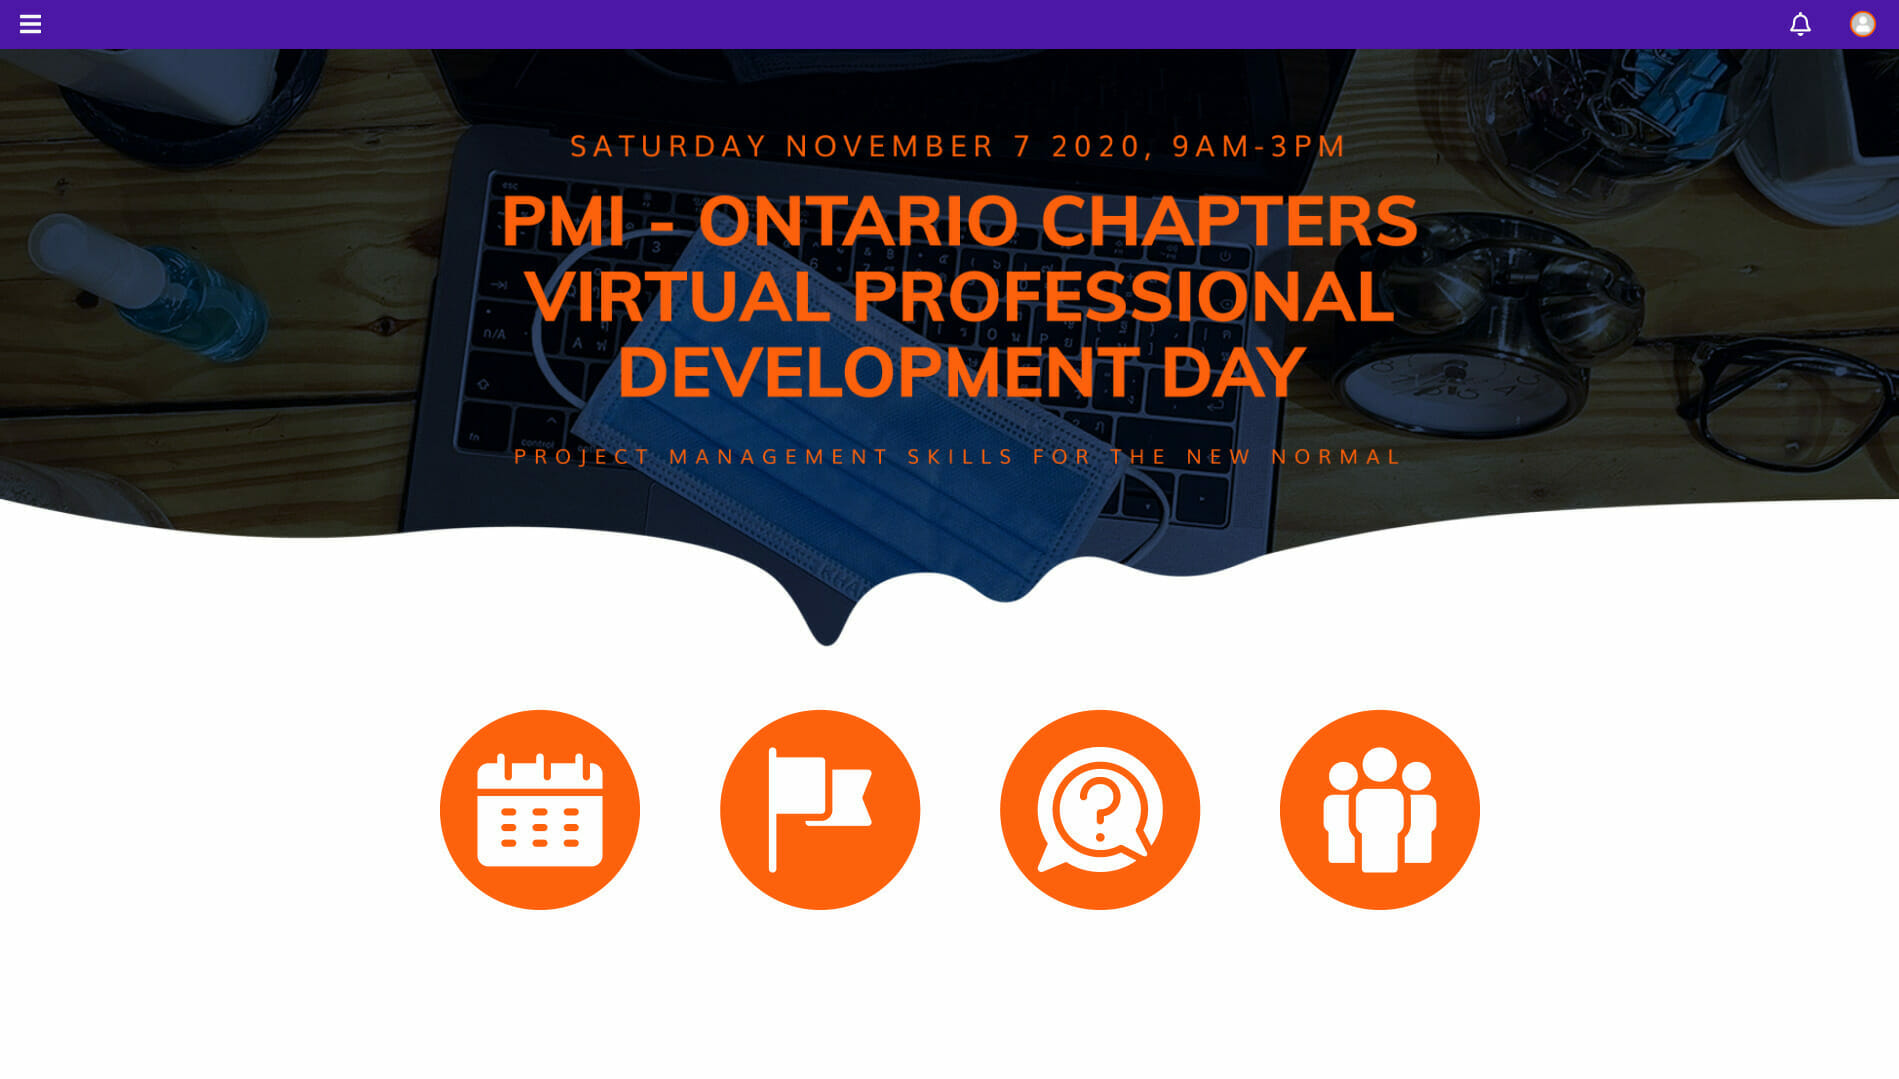 Virtual Conference Platform Design showing a darkened background image of a laptop with a face mask on it overlaid with the words "PMI Ontario Chapters Virtual Professional Development Day" in orange. Underneath are four orange icons on a white background